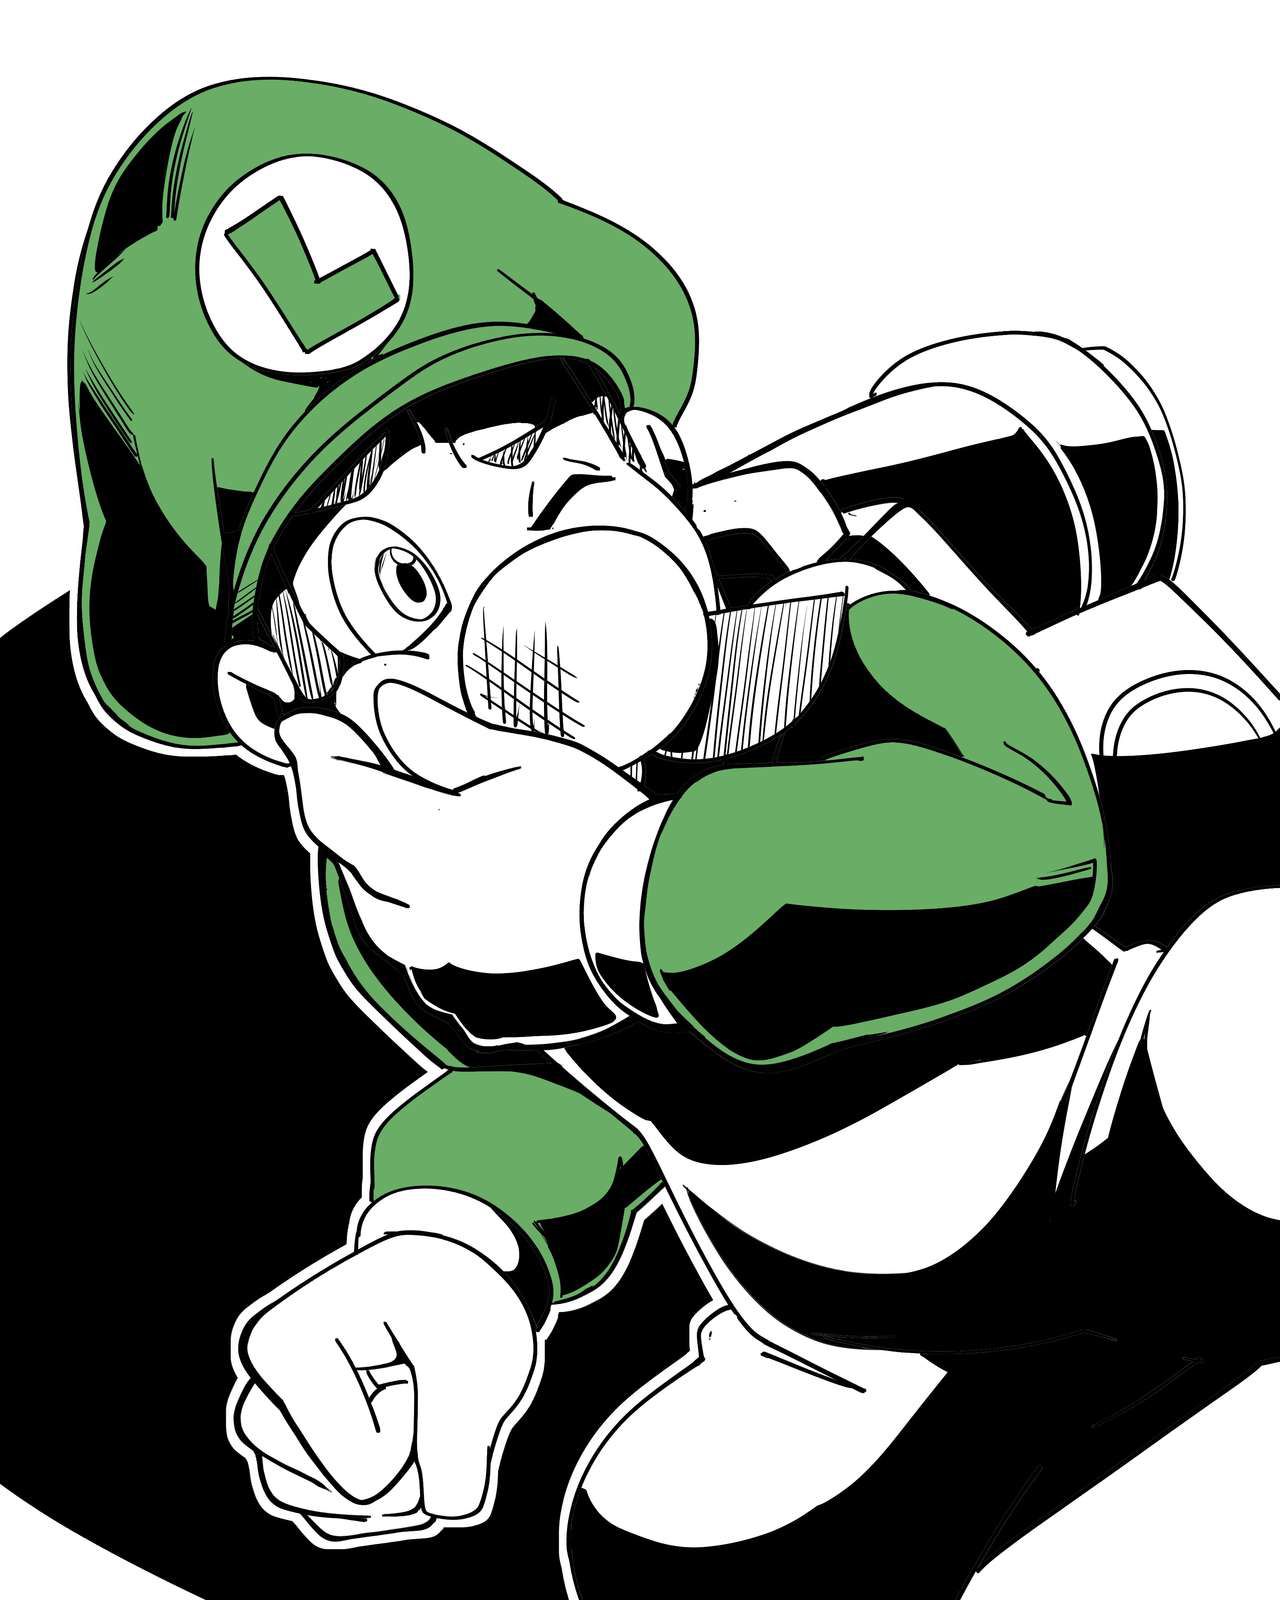 [Nisego] Inktober 2019 (Super Mario Brothers) [Ongoing] 37